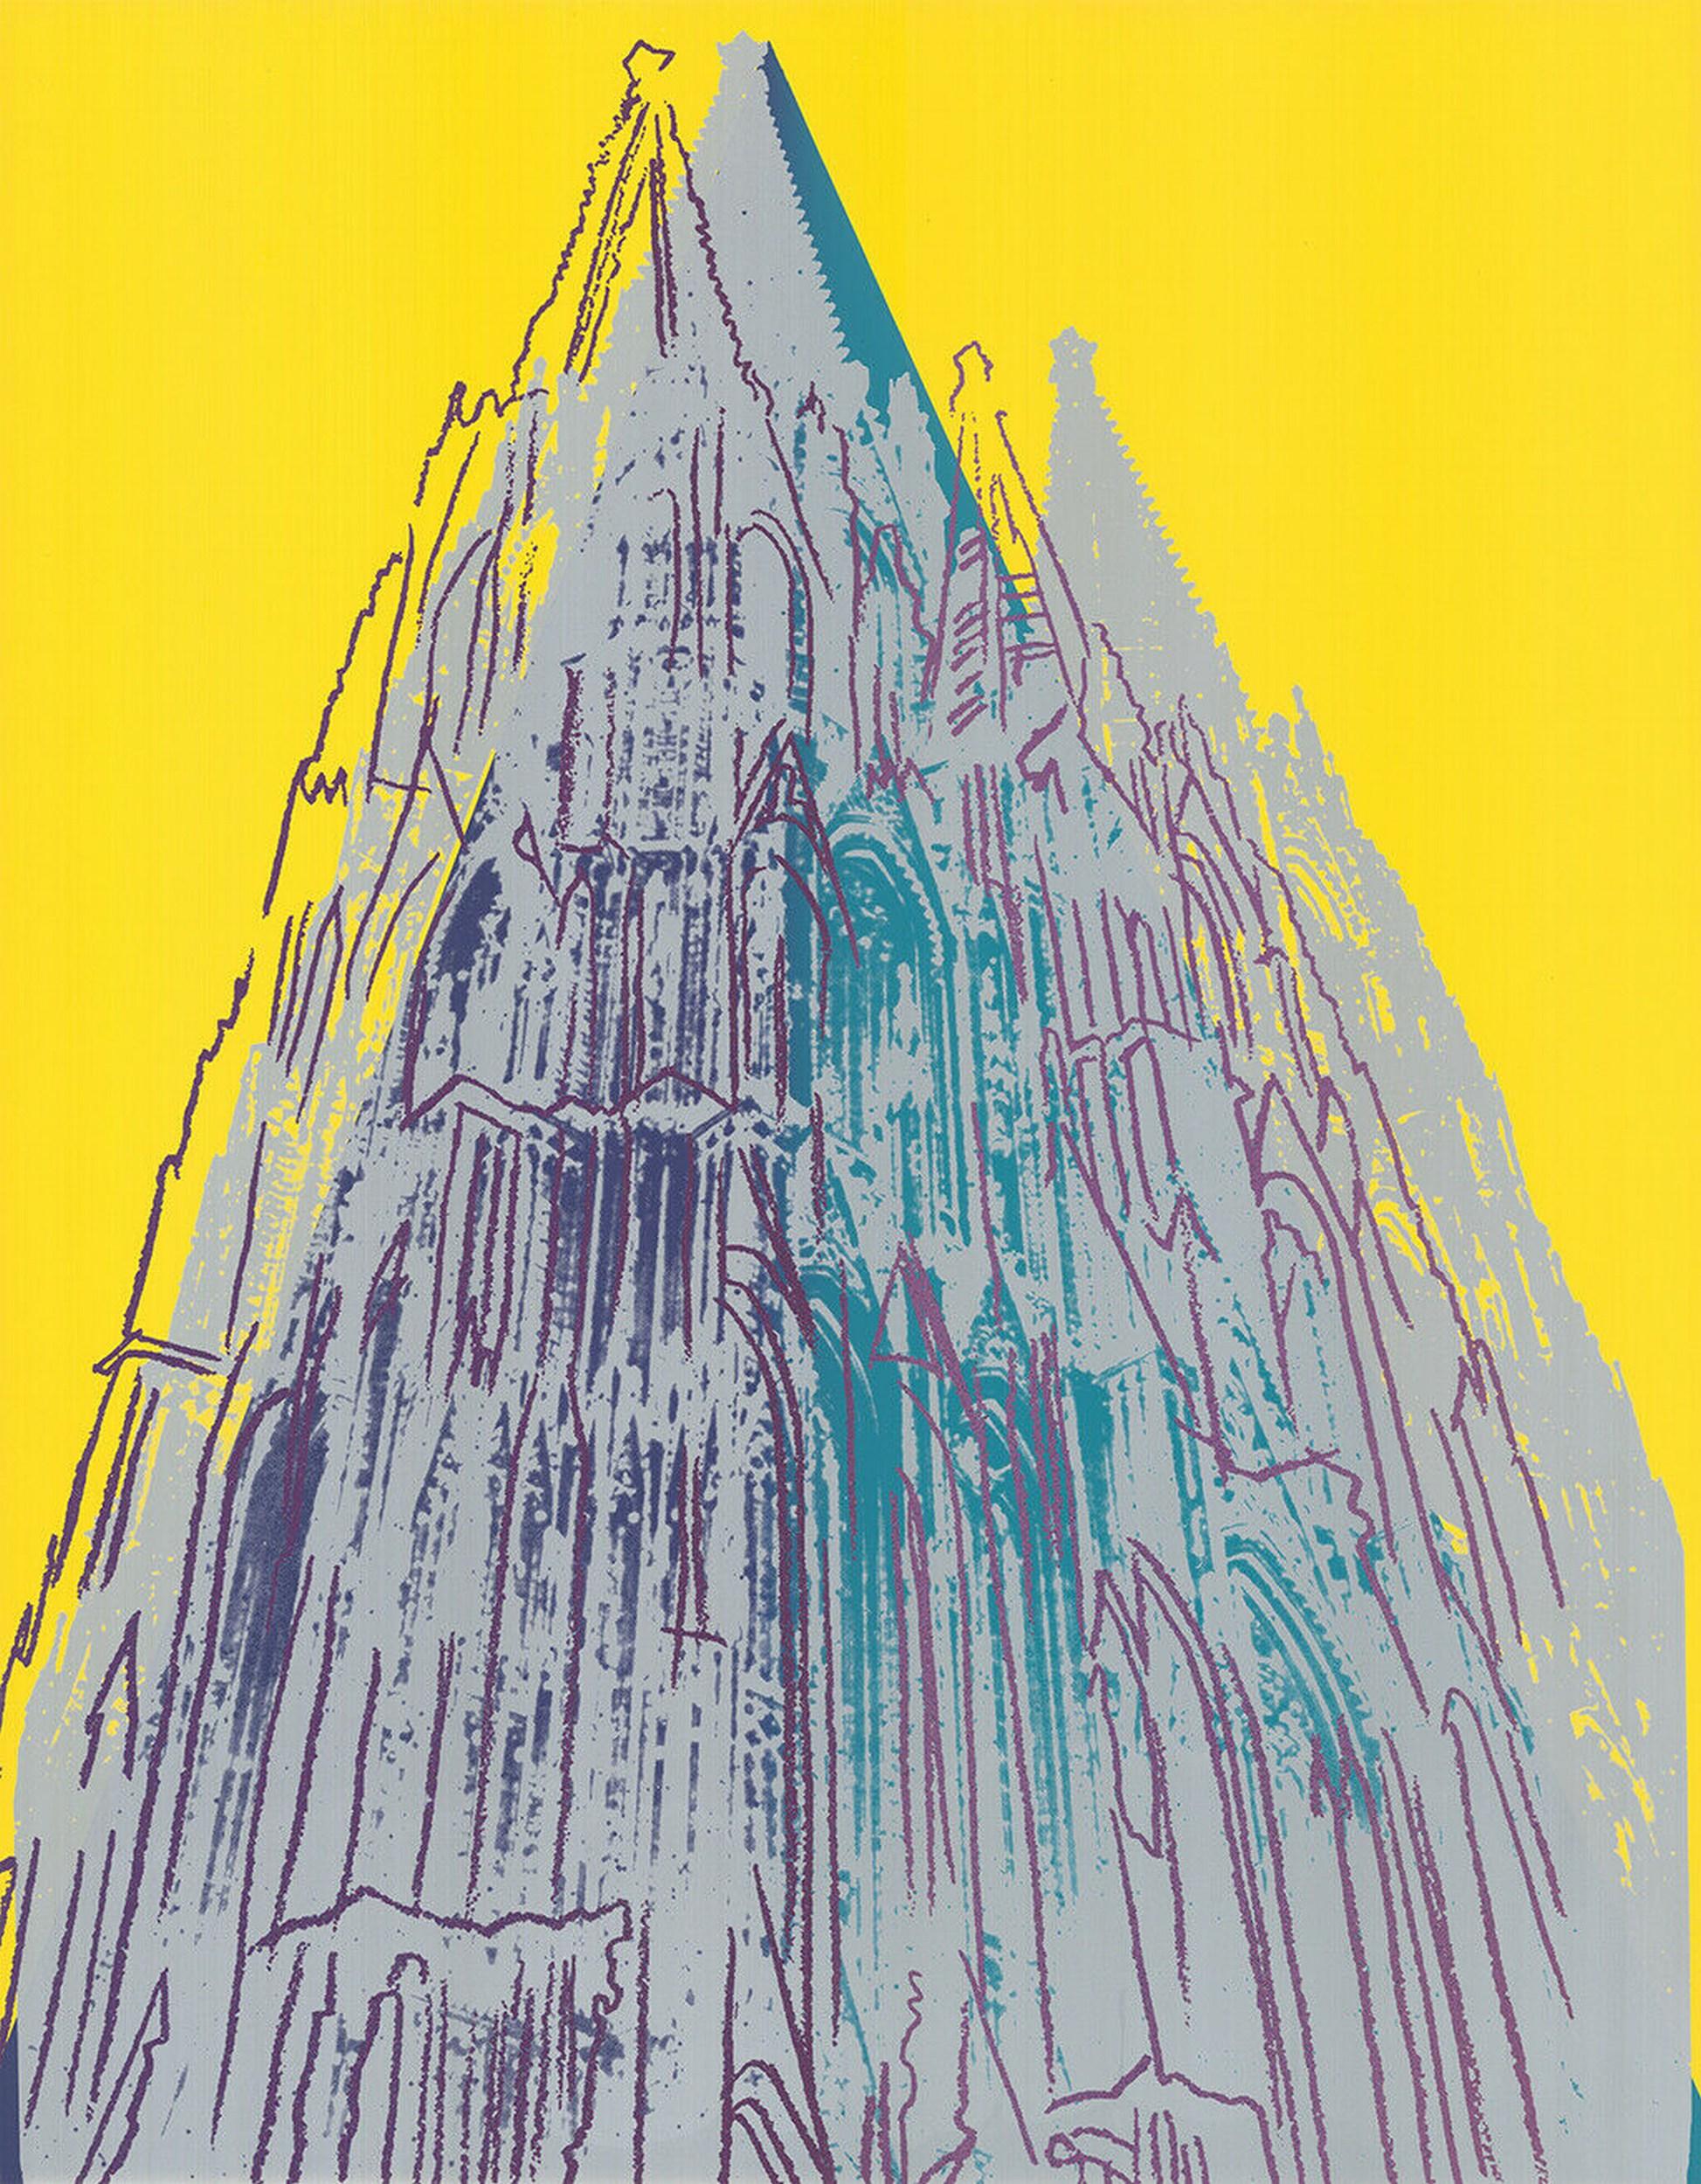 Cologne Cathedral (Yellow, Teal) (Pop Art, Andy Warhol)  - Print by Jurgen Kuhl 